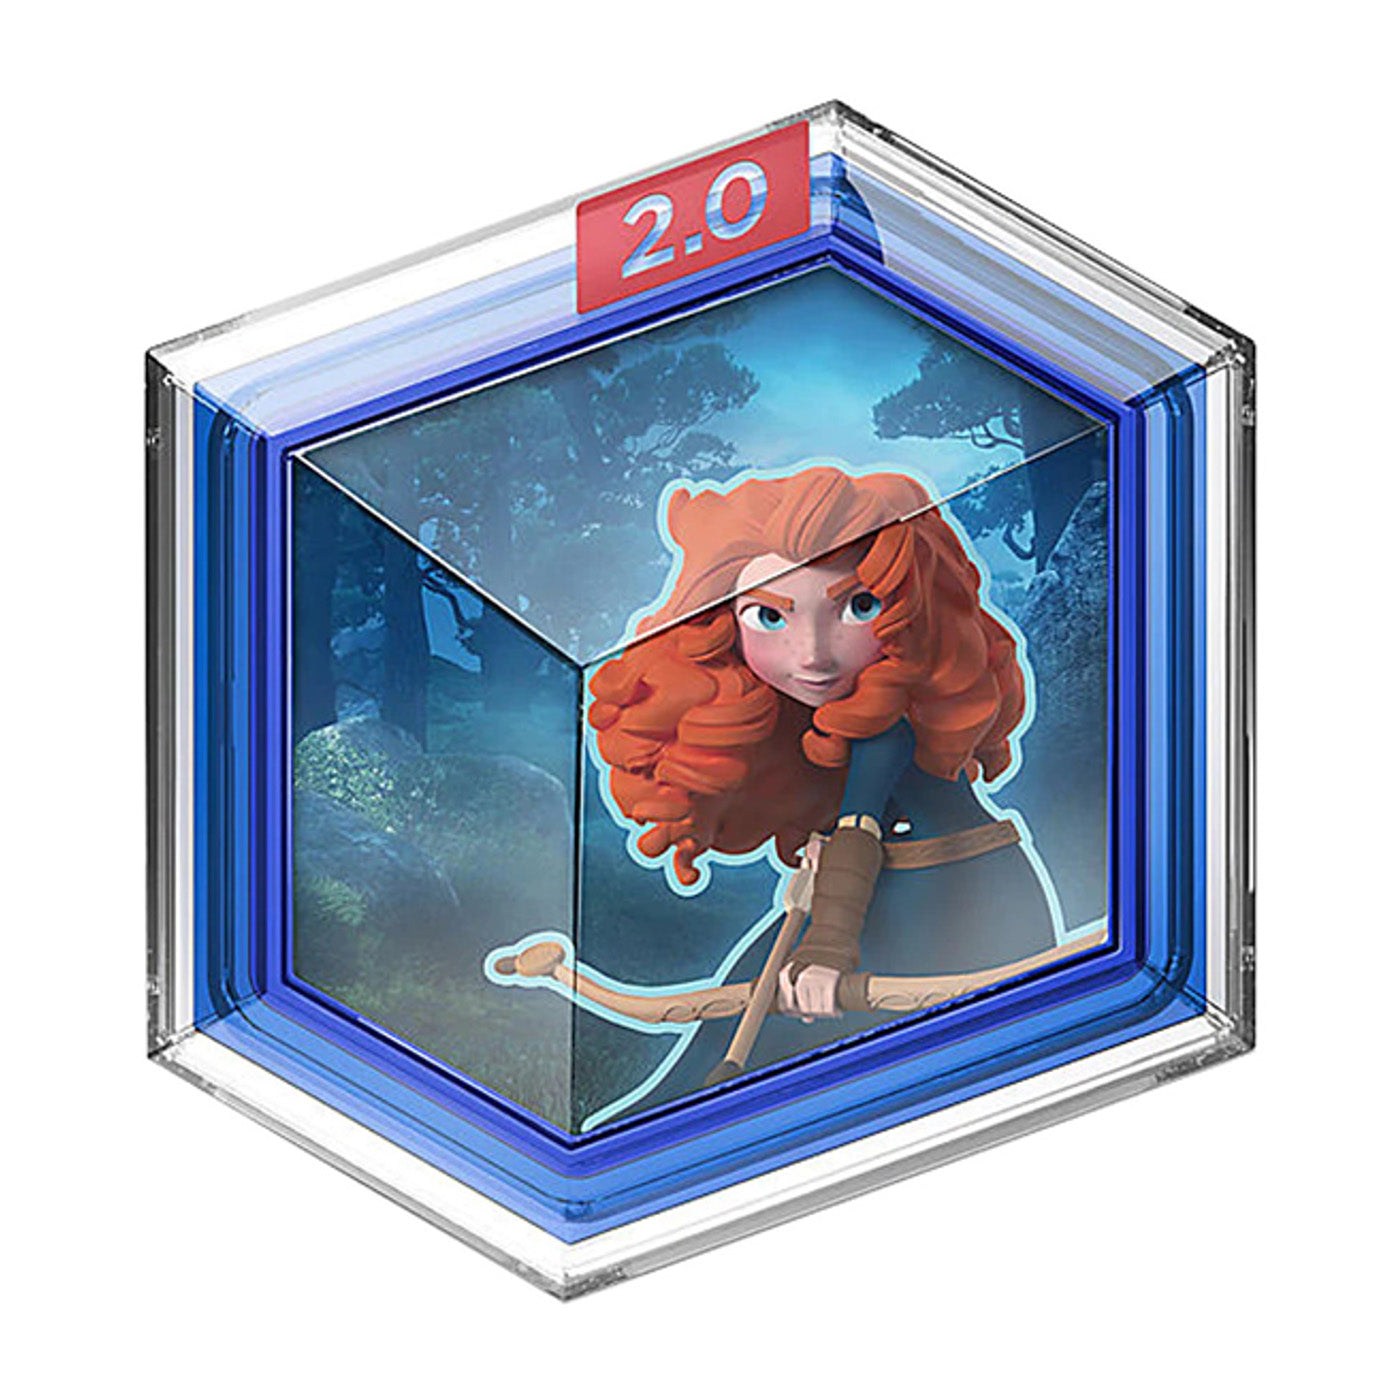 Disney Infinity 2.0 Toy Box Game: Brave Forest Siege